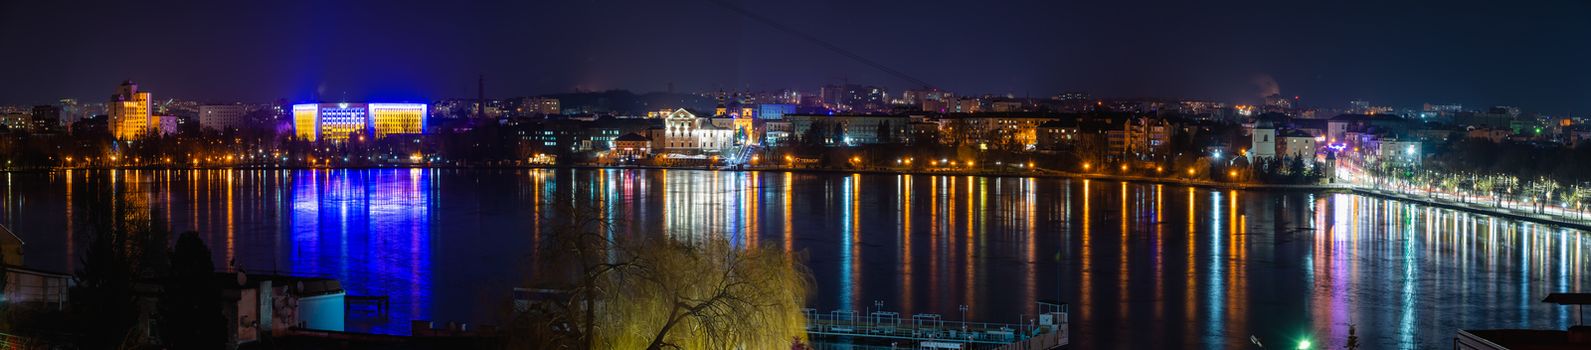 Ternopil, Ukraine 01.05.2020. Panoramic view of Ternopil pond and castle in Ternopol, Ukraine, on a winter night